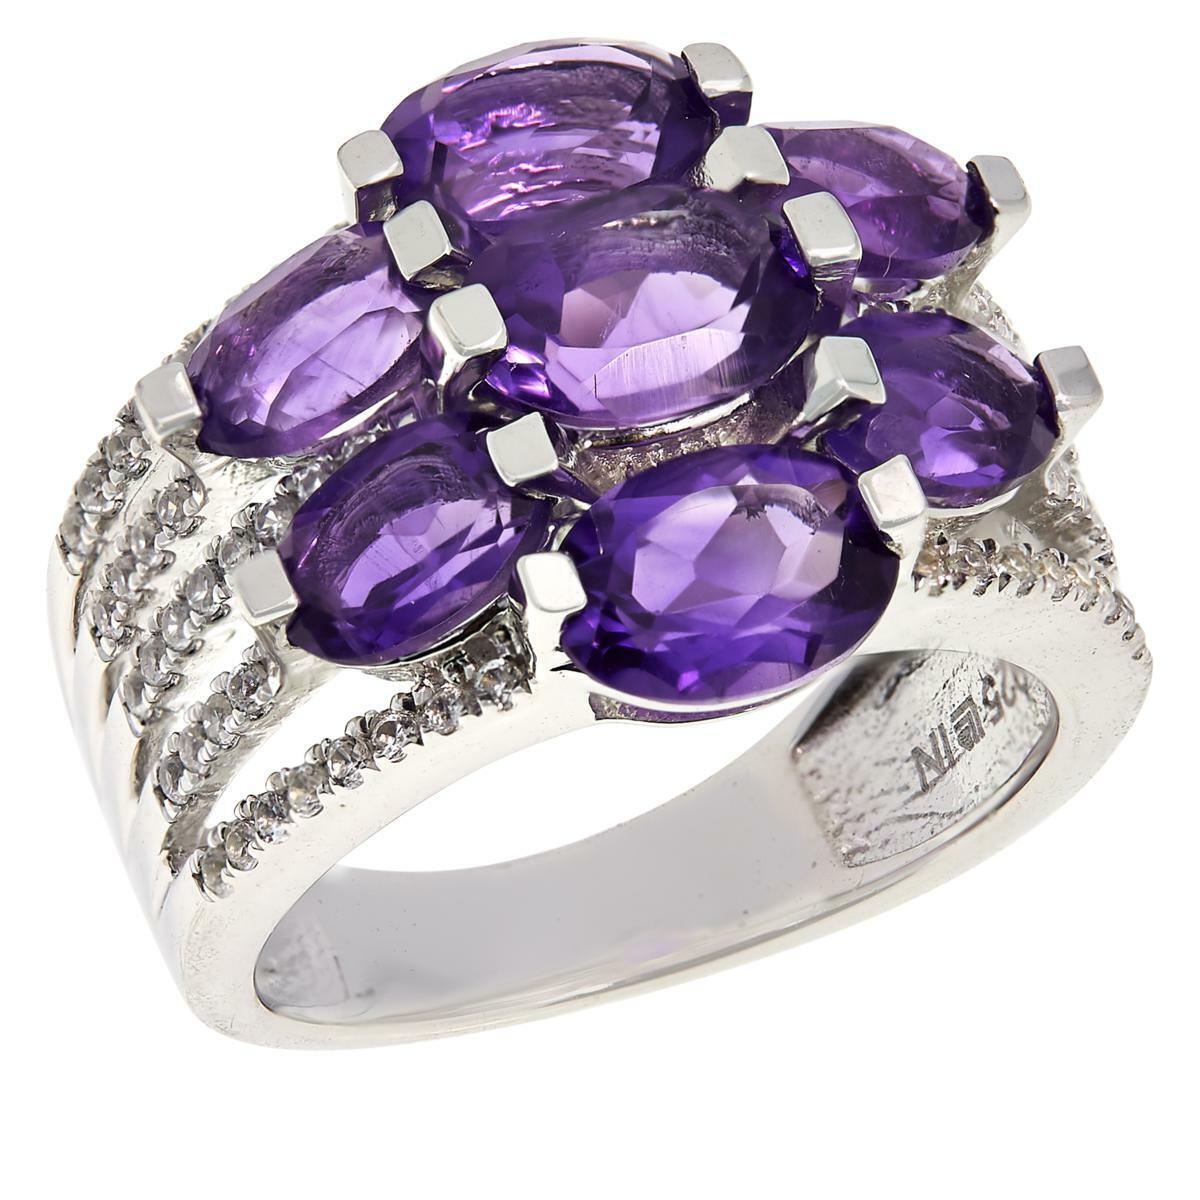 Colleen Lopez Oval Amethyst and White Zircon 7-Stone Ring, Size 8